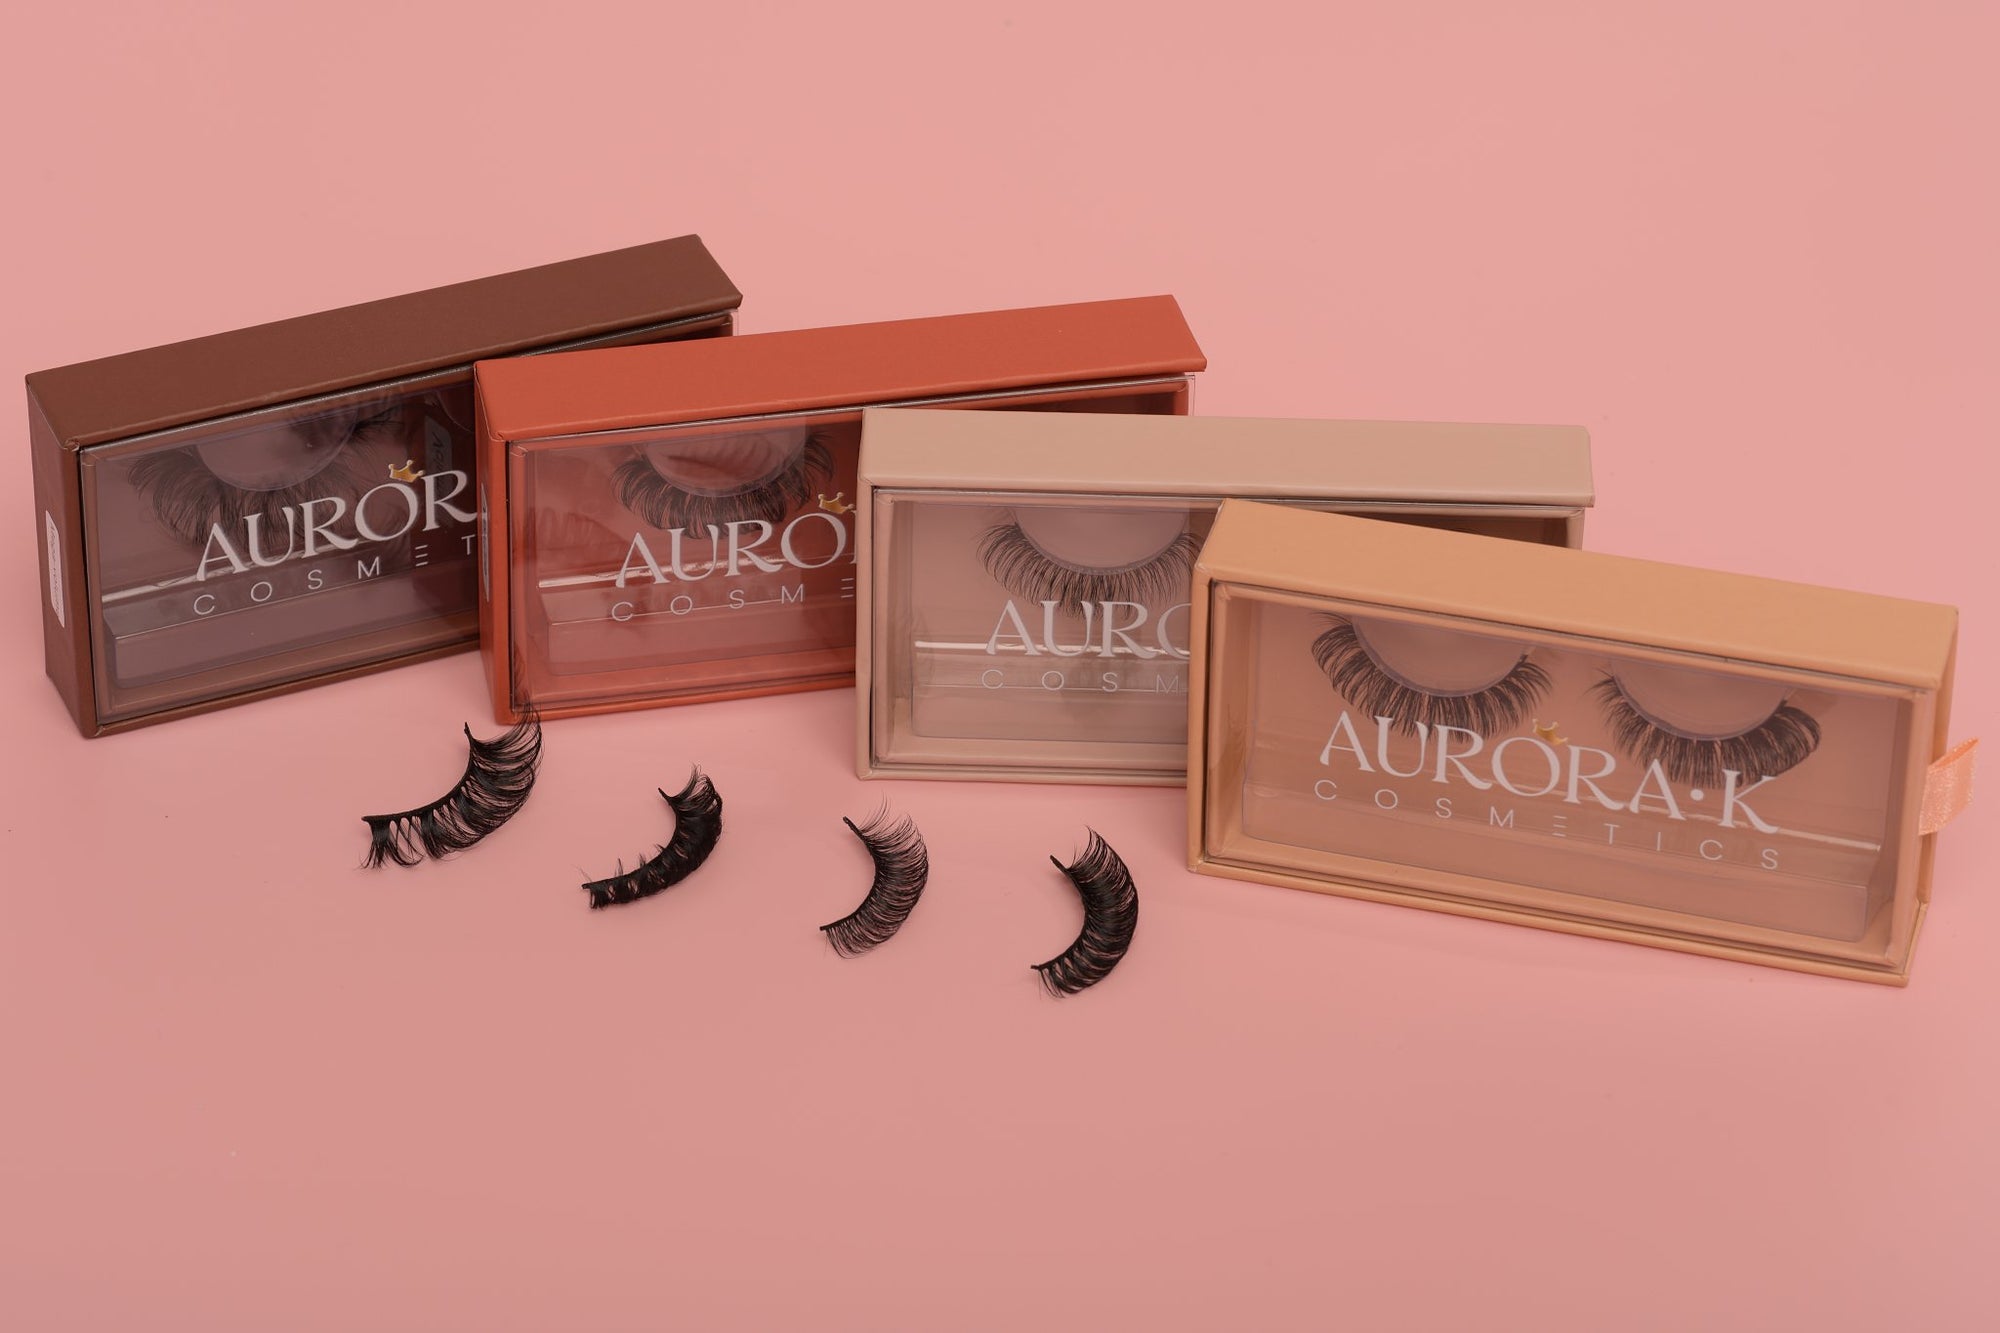 A group of four lash boxes in warm brown colors with the lashes (classic, volume, volume and mega volume) laid out by the side from Aurora K Cosmetics